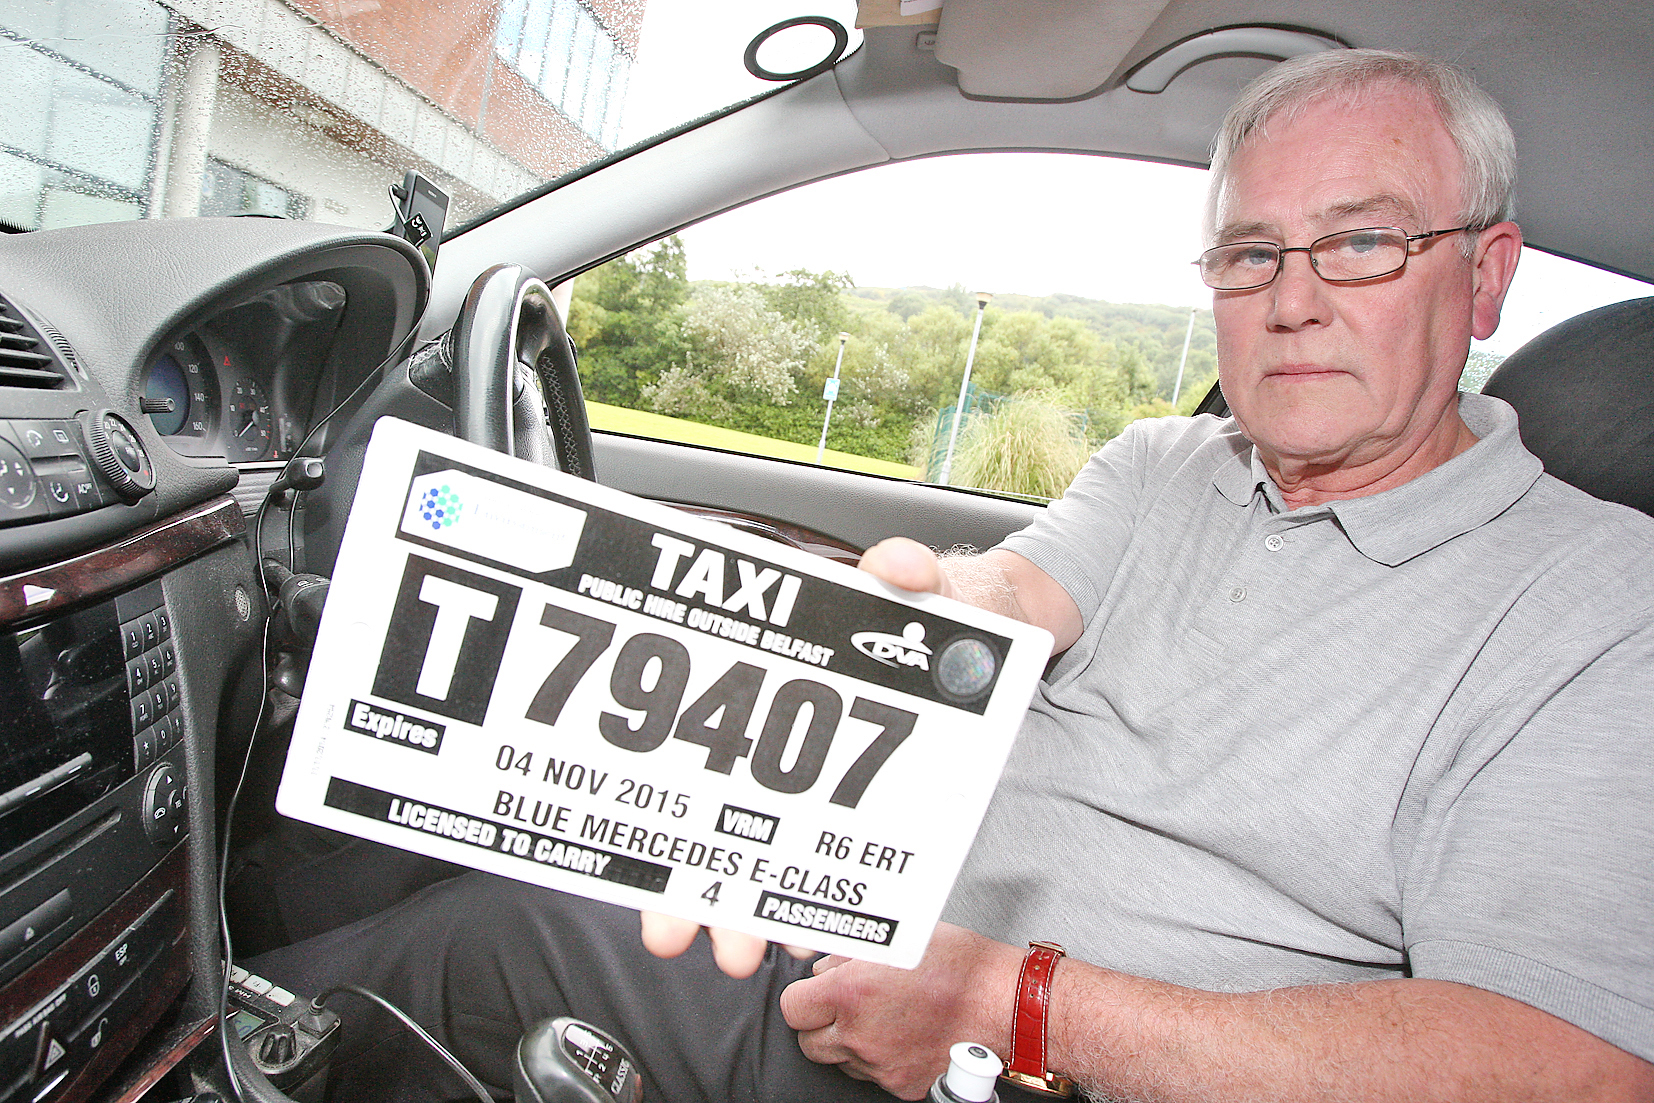 Belfast taxi man Robert Mateer is behind the campaign for an overhaul in the taxi industry